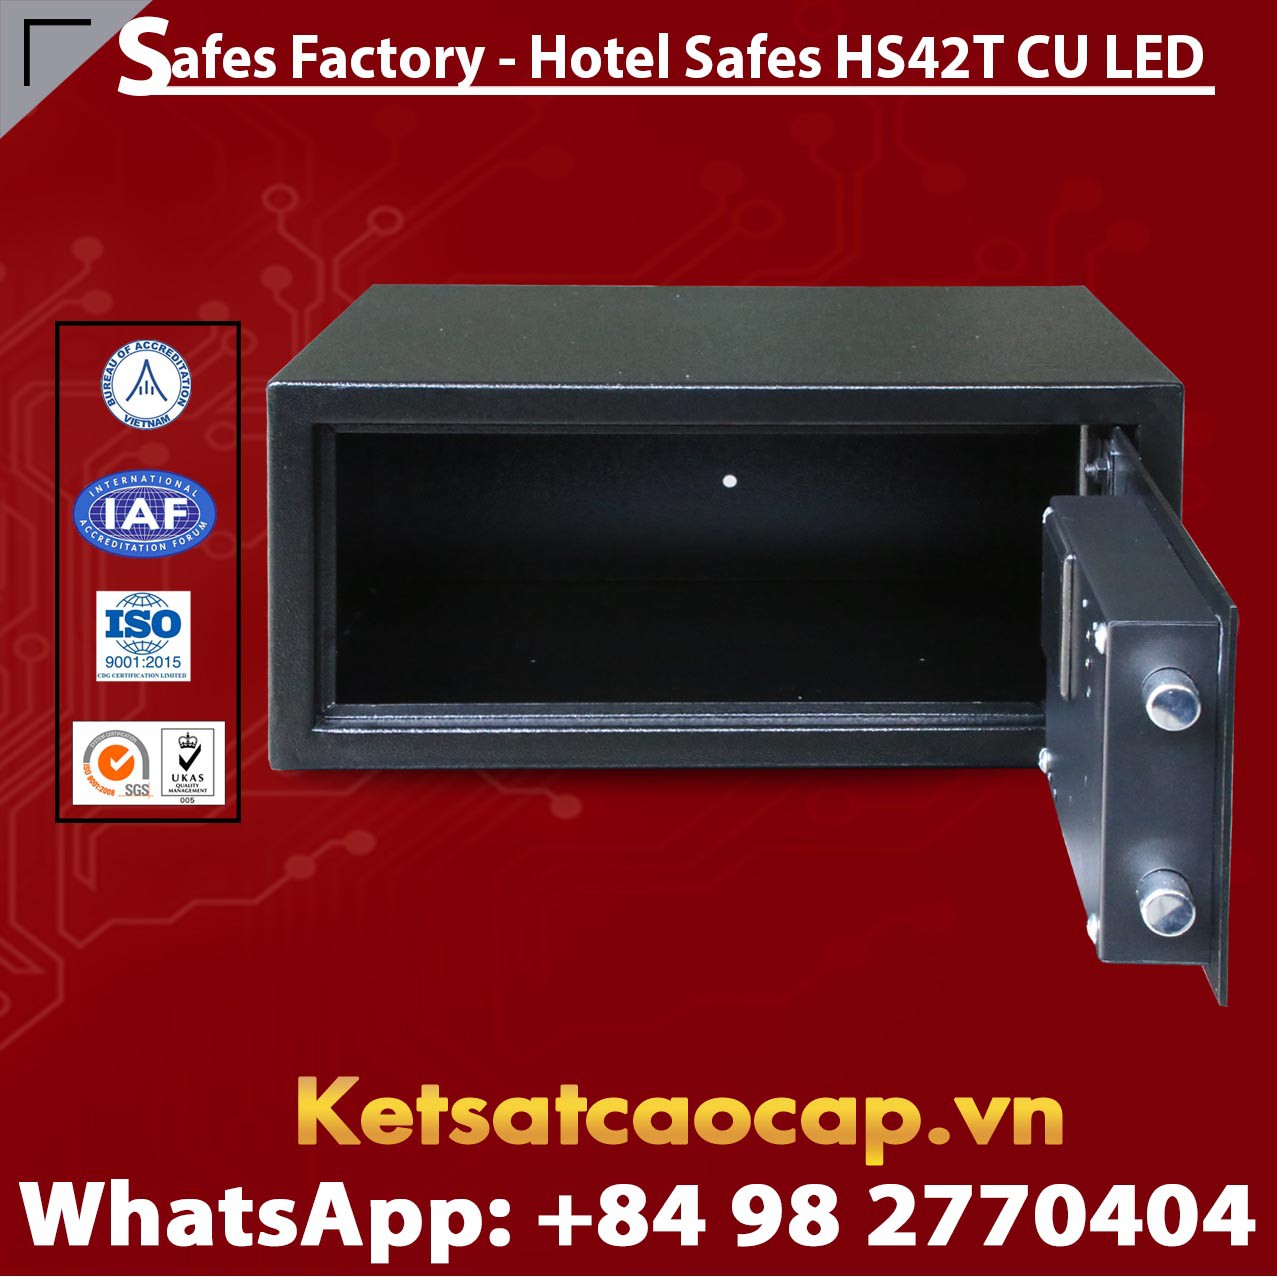 Best Sellers In Hotel Safes HOMESUN HS42T CU LED